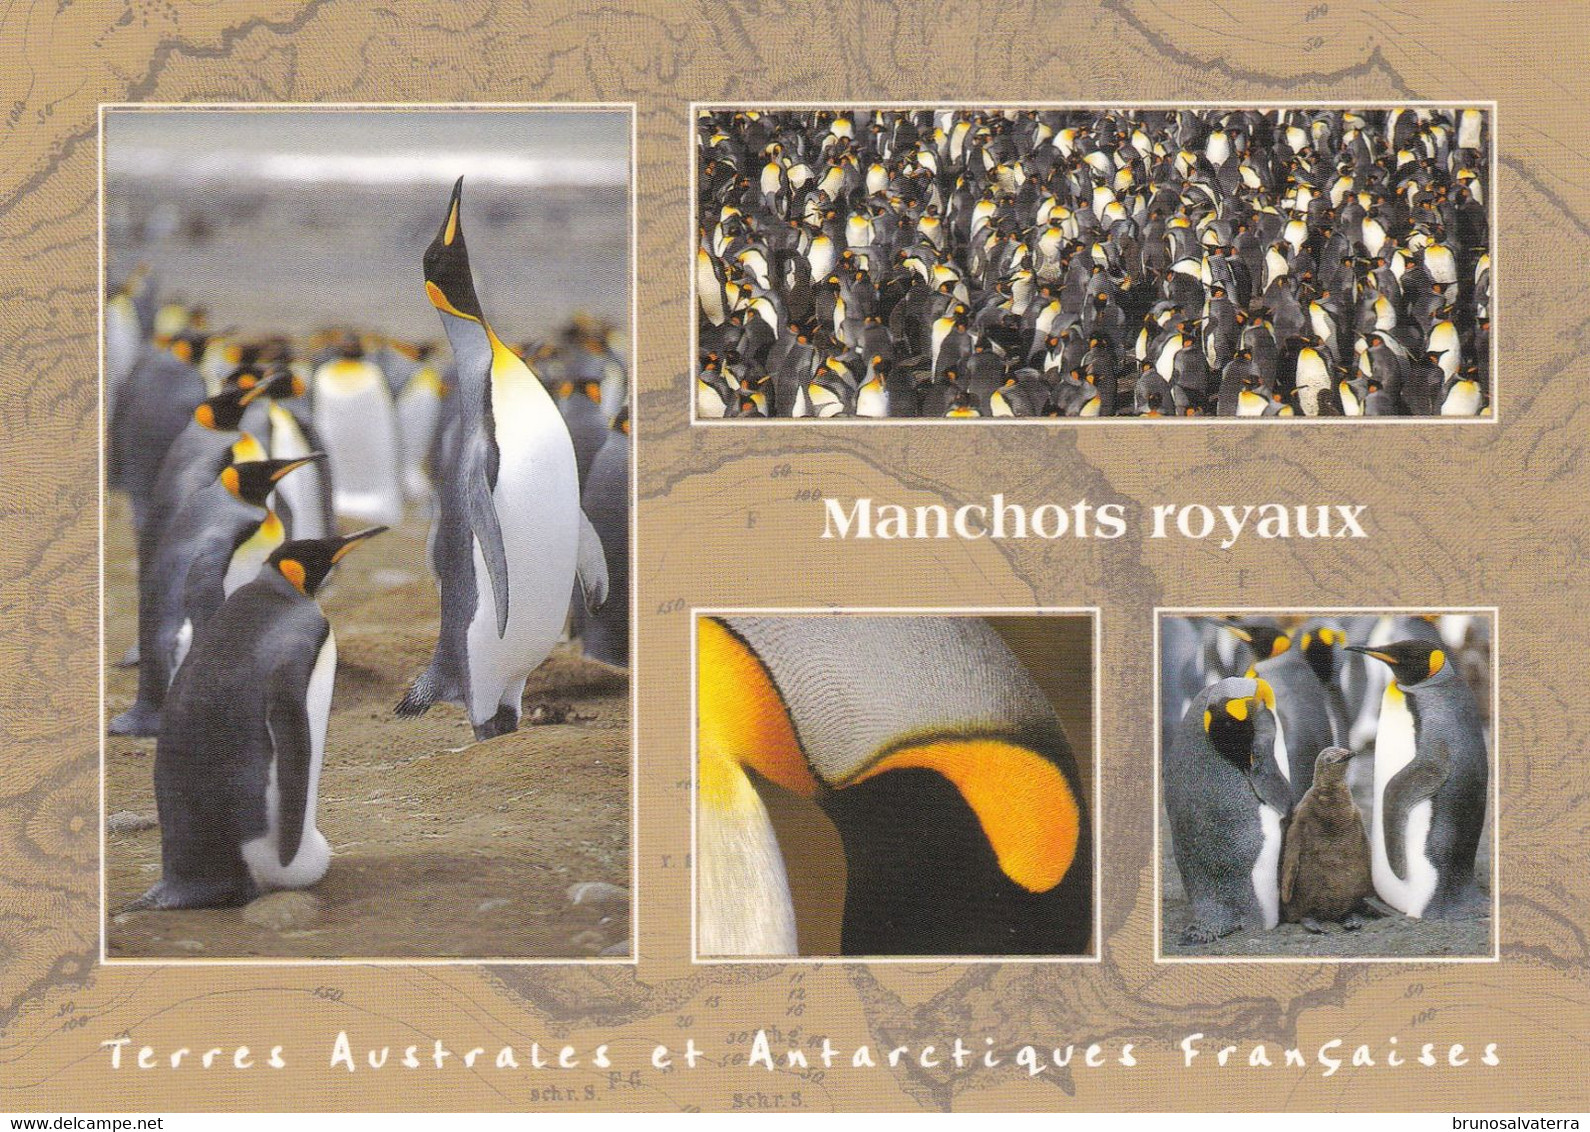 TERRES AUSTRALES ET ANTARCTIQUES FRANCAISES - Manchots Royaux - TAAF : French Southern And Antarctic Lands